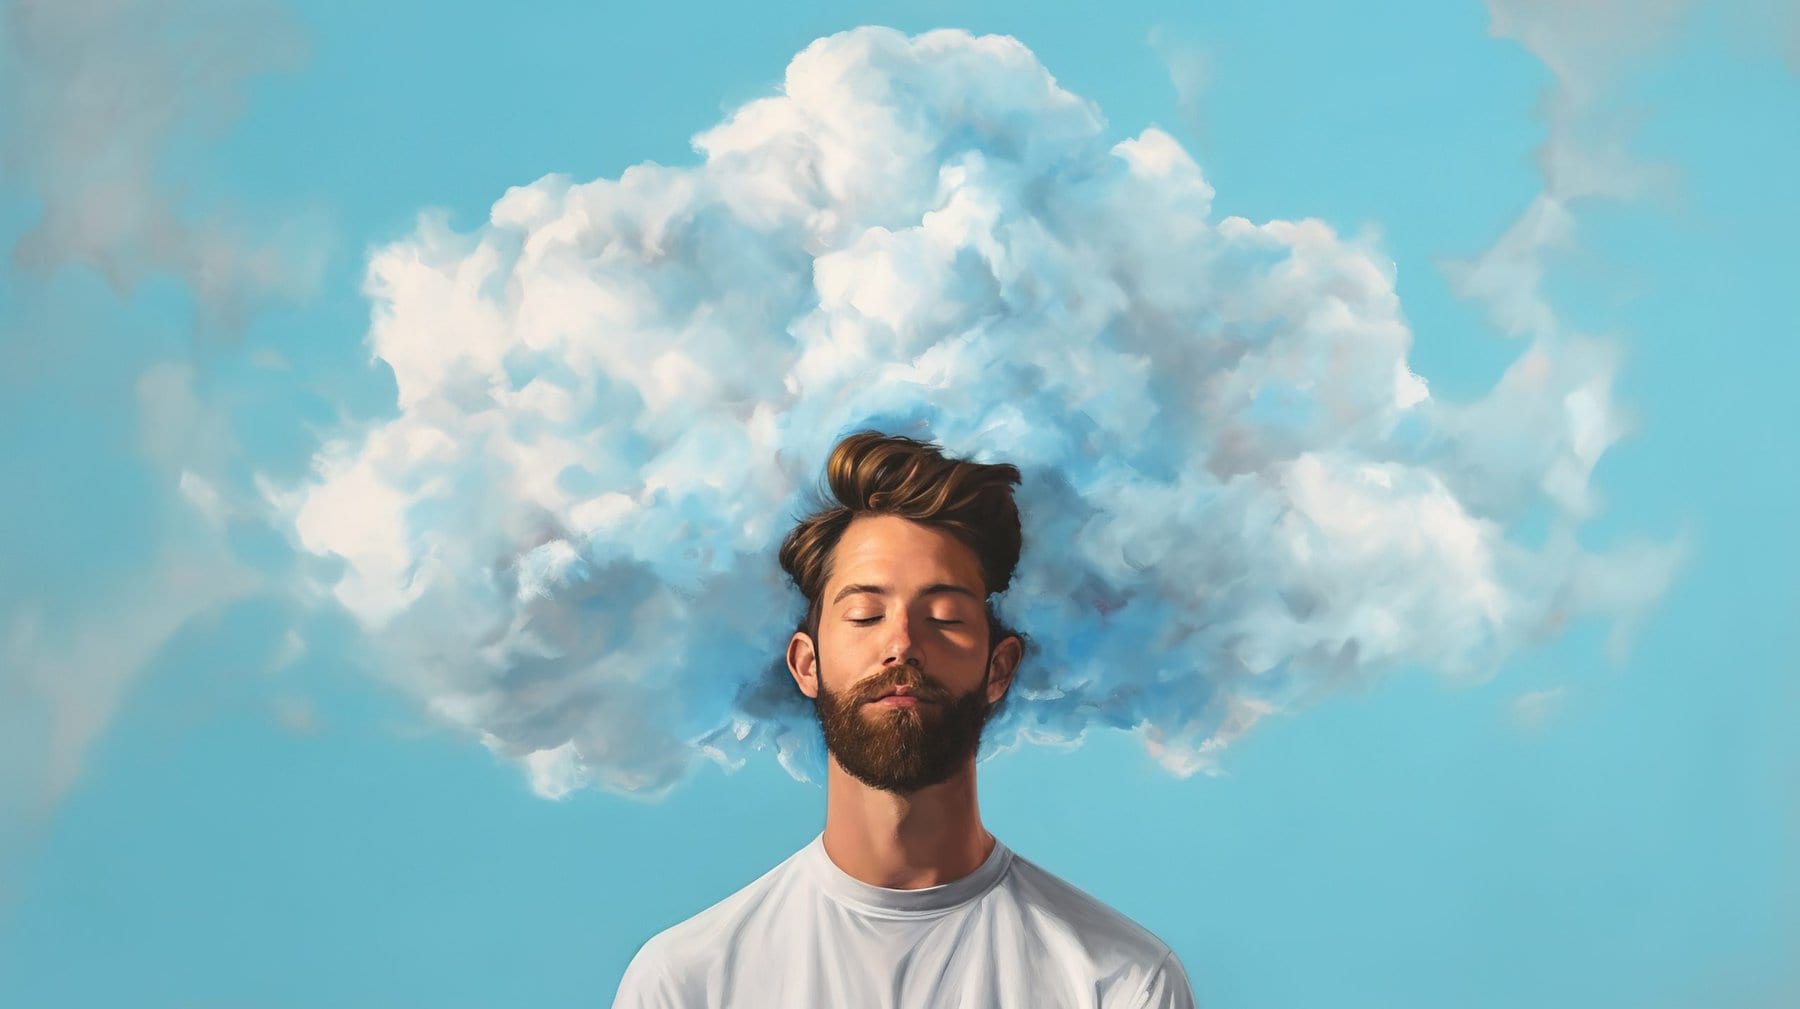 a cartoon depiction of a person with their eyes closed and their head in the clouds